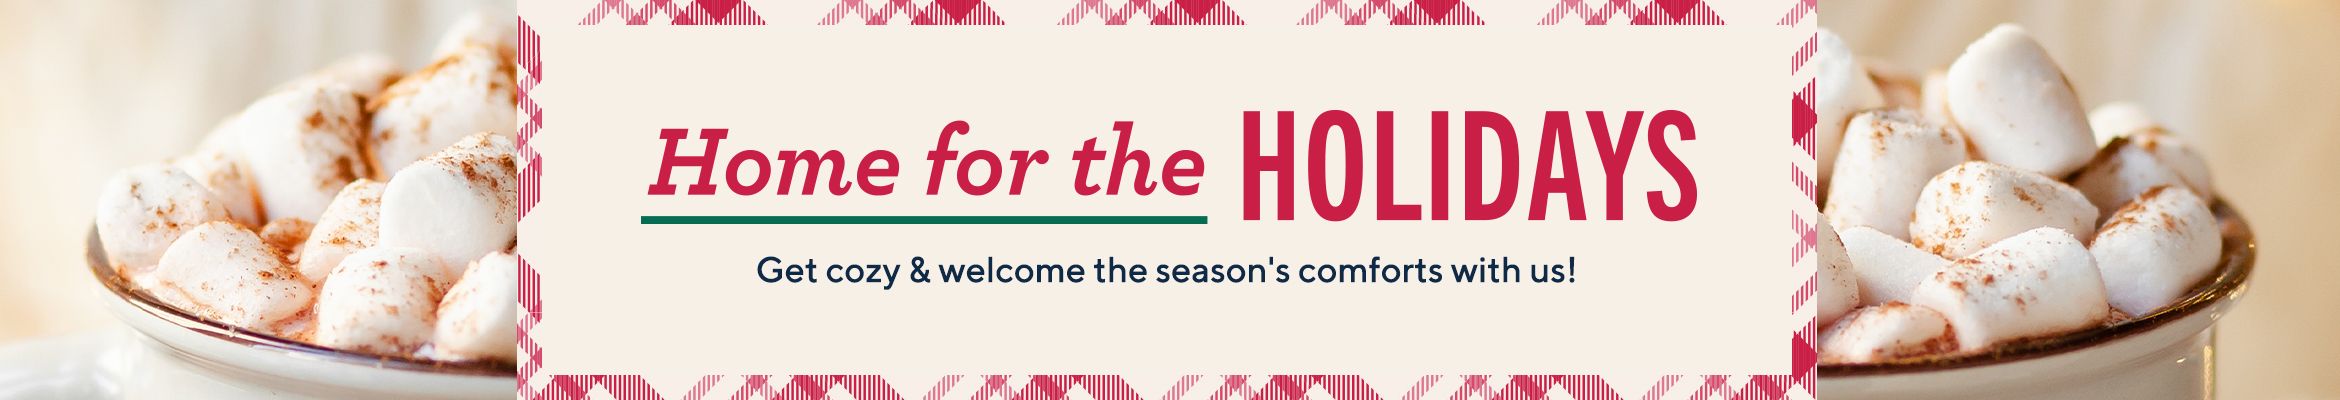 Home for the Holidays.  Get cozy & welcome the season's comforts with us!